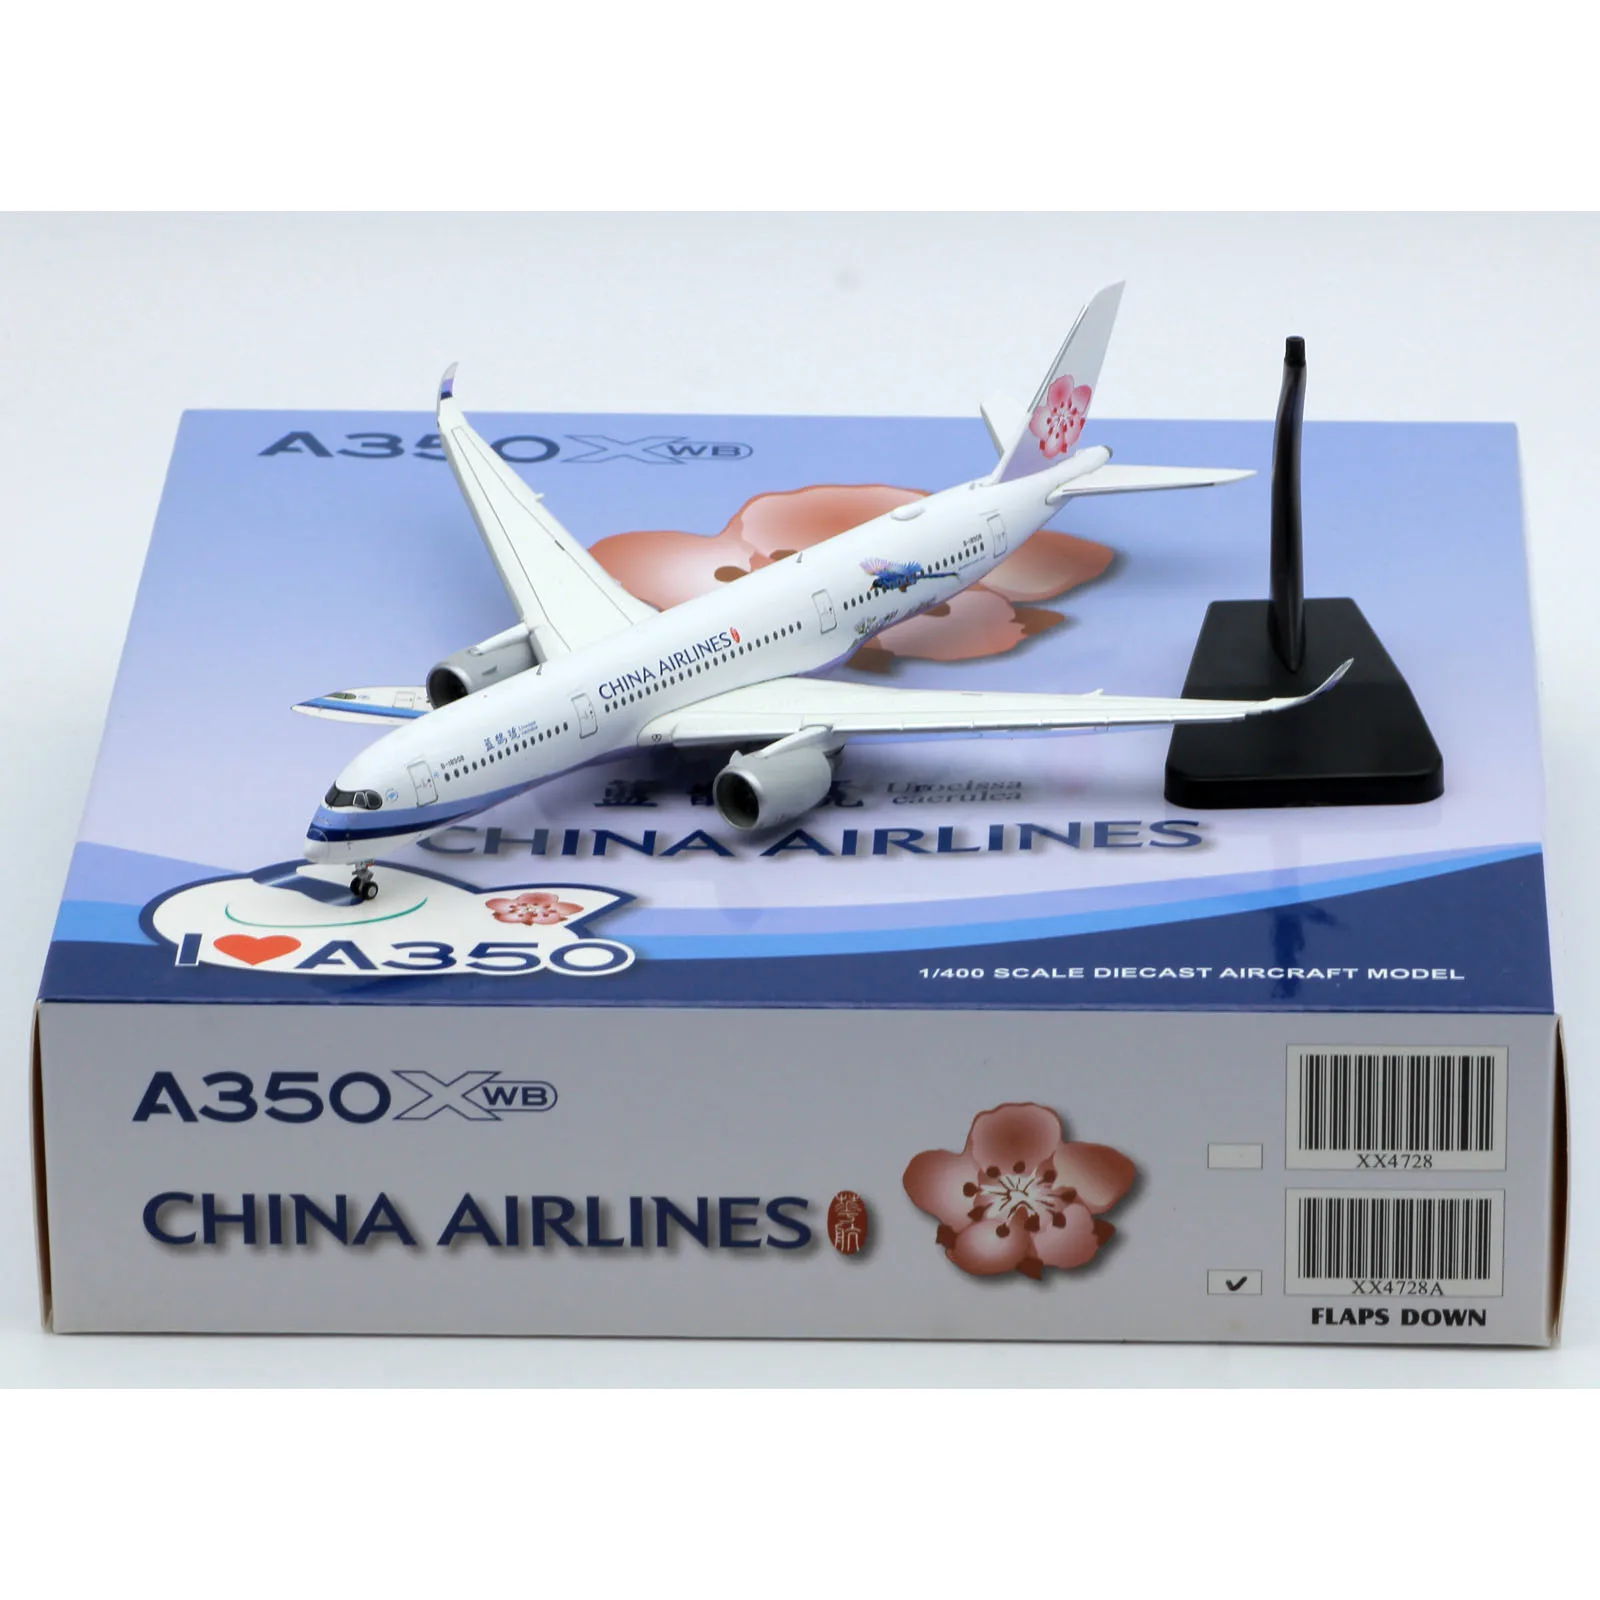 

XX4728A Alloy Collectible Plane Gift JC Wings 1:400 China Airlines "Skyteam" Airbus A350-900 Diecast Model B-18908 Flaps Down